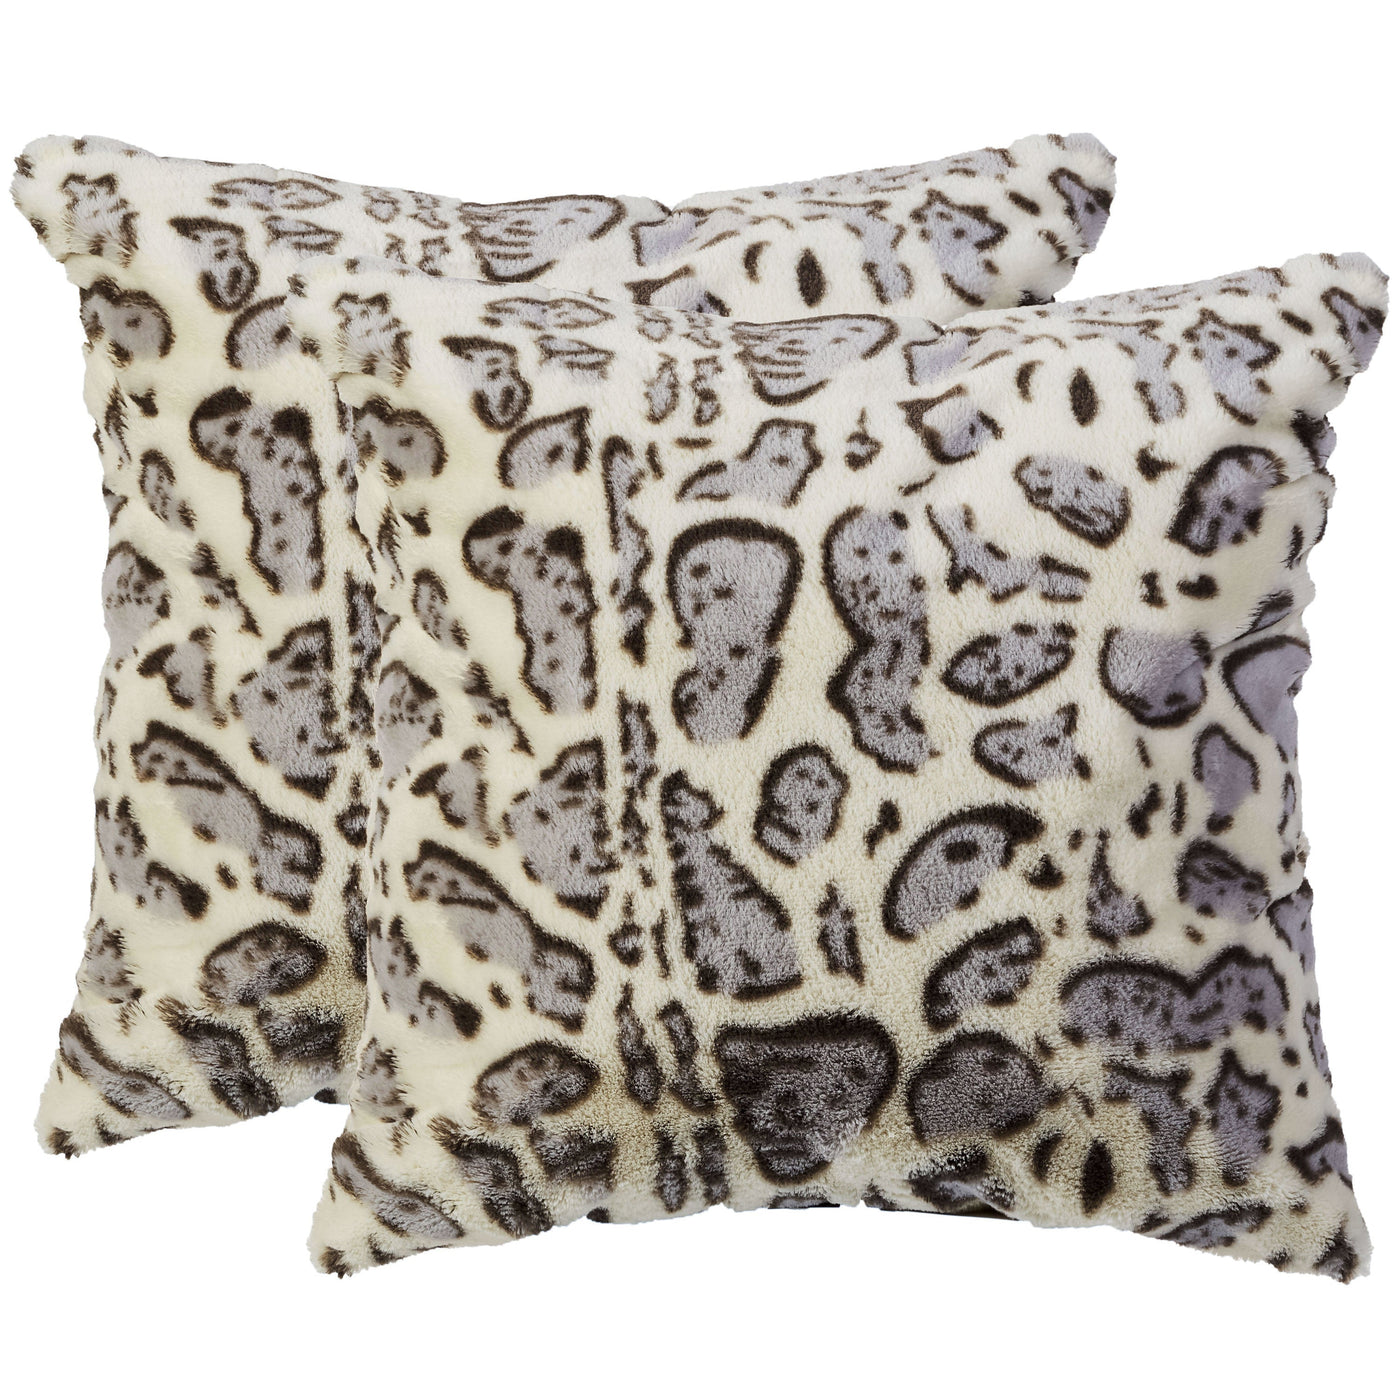 https://www.cheercollection.com/cdn/shop/products/cheer-collection-set-of-2-snow-leopard-print-throw-pillows-soft-velvety-faux-fur-decorative-lumbar-couch-pillows-163368_1400x.jpg?v=1671777947